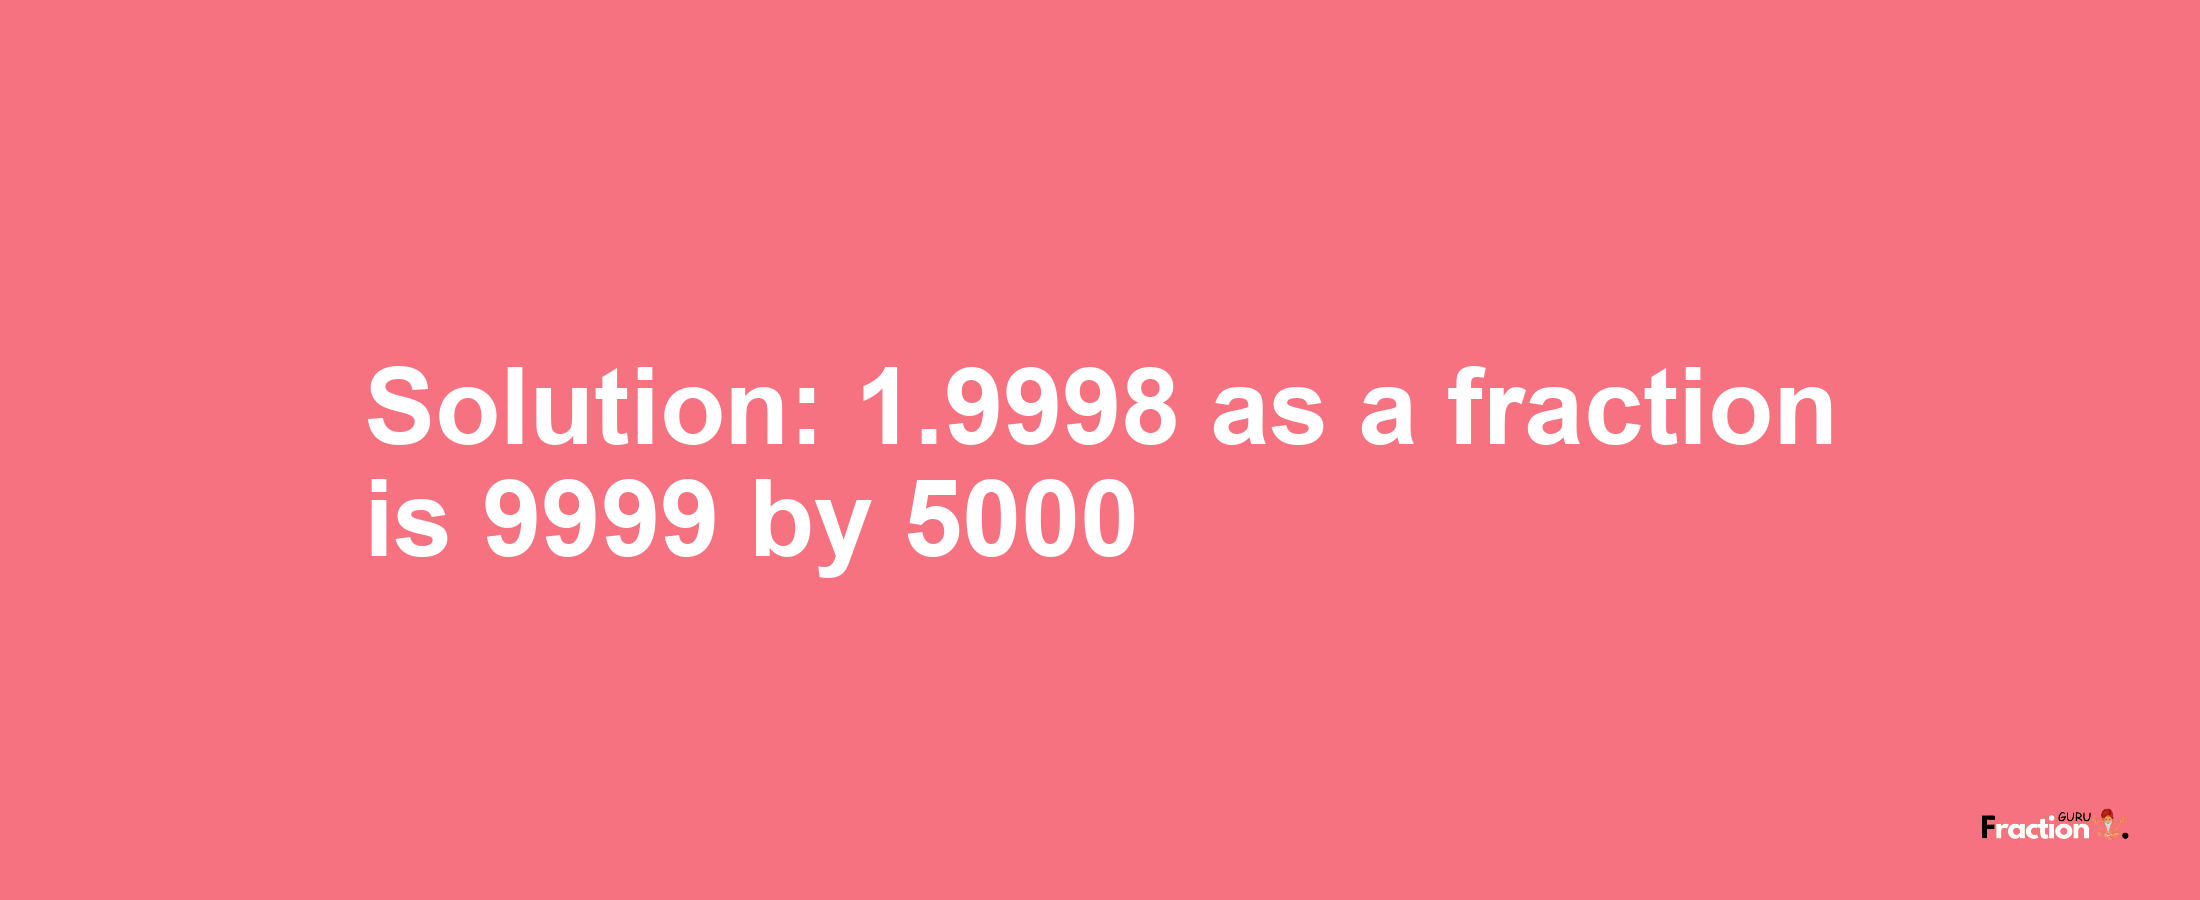 Solution:1.9998 as a fraction is 9999/5000